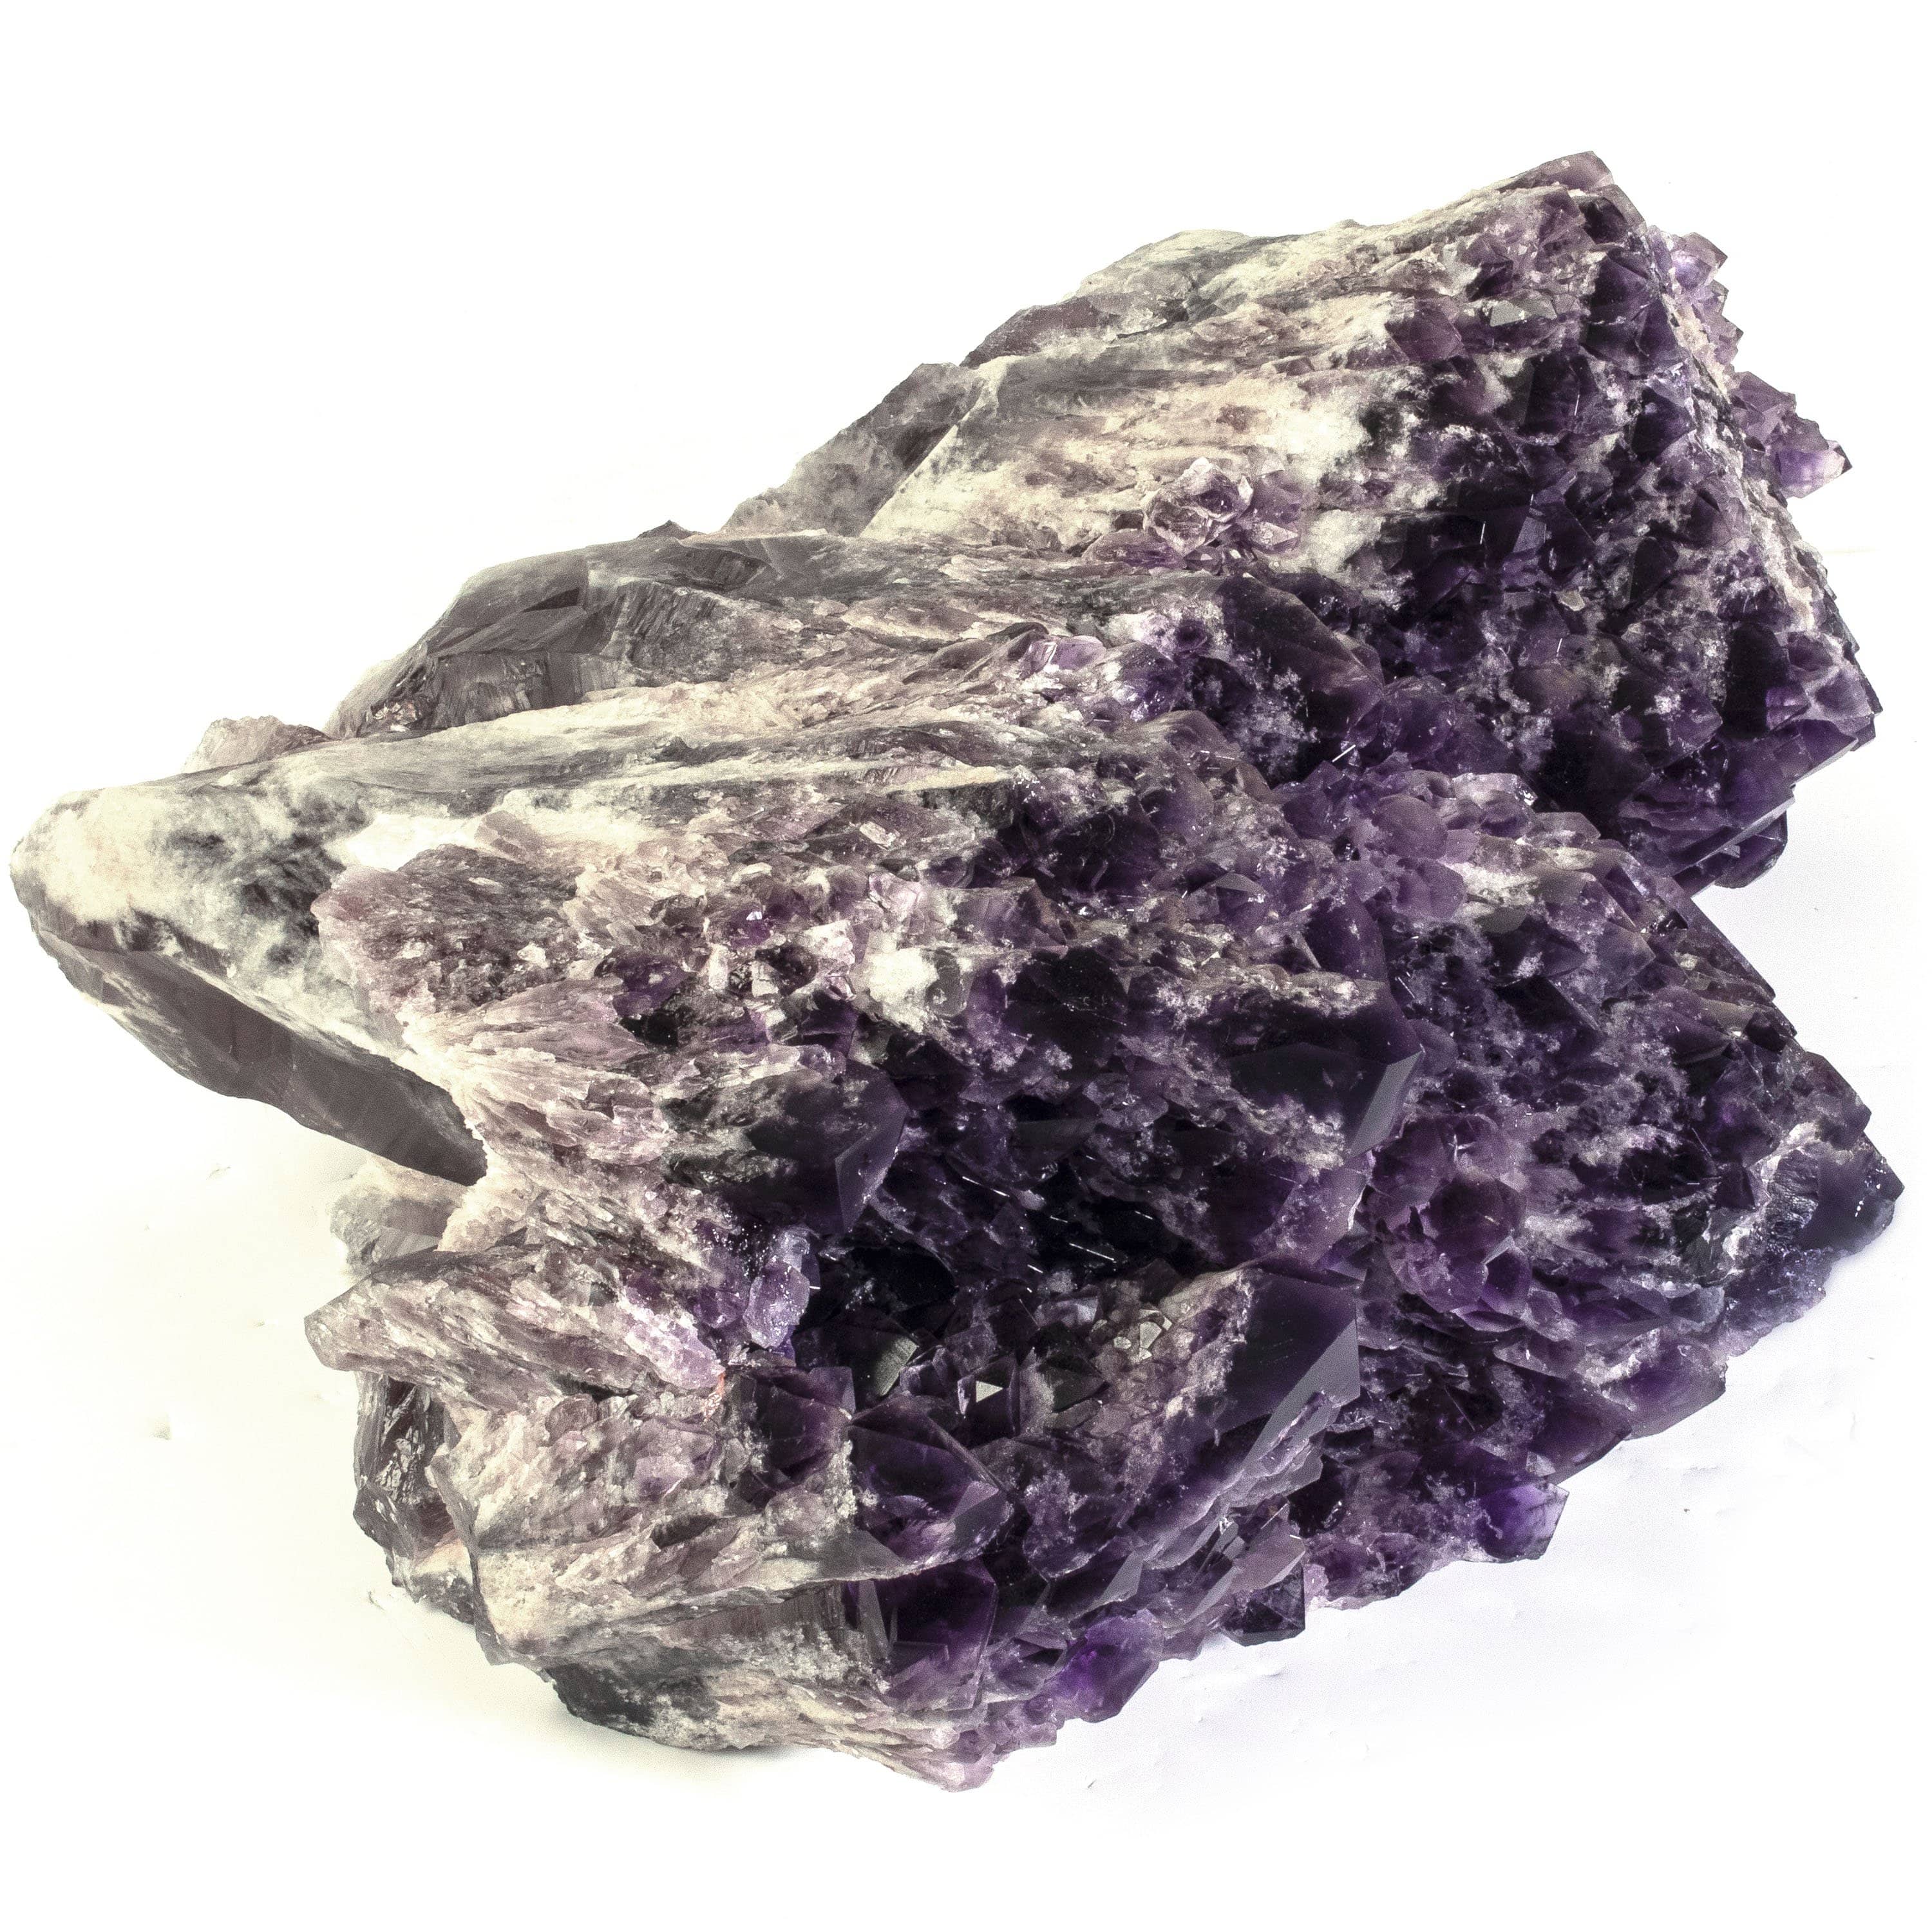 Kalifano Amethyst Rare Natural Elestial Amethyst Cluster Point from Brazil - 54.2 lbs ALW8900.001